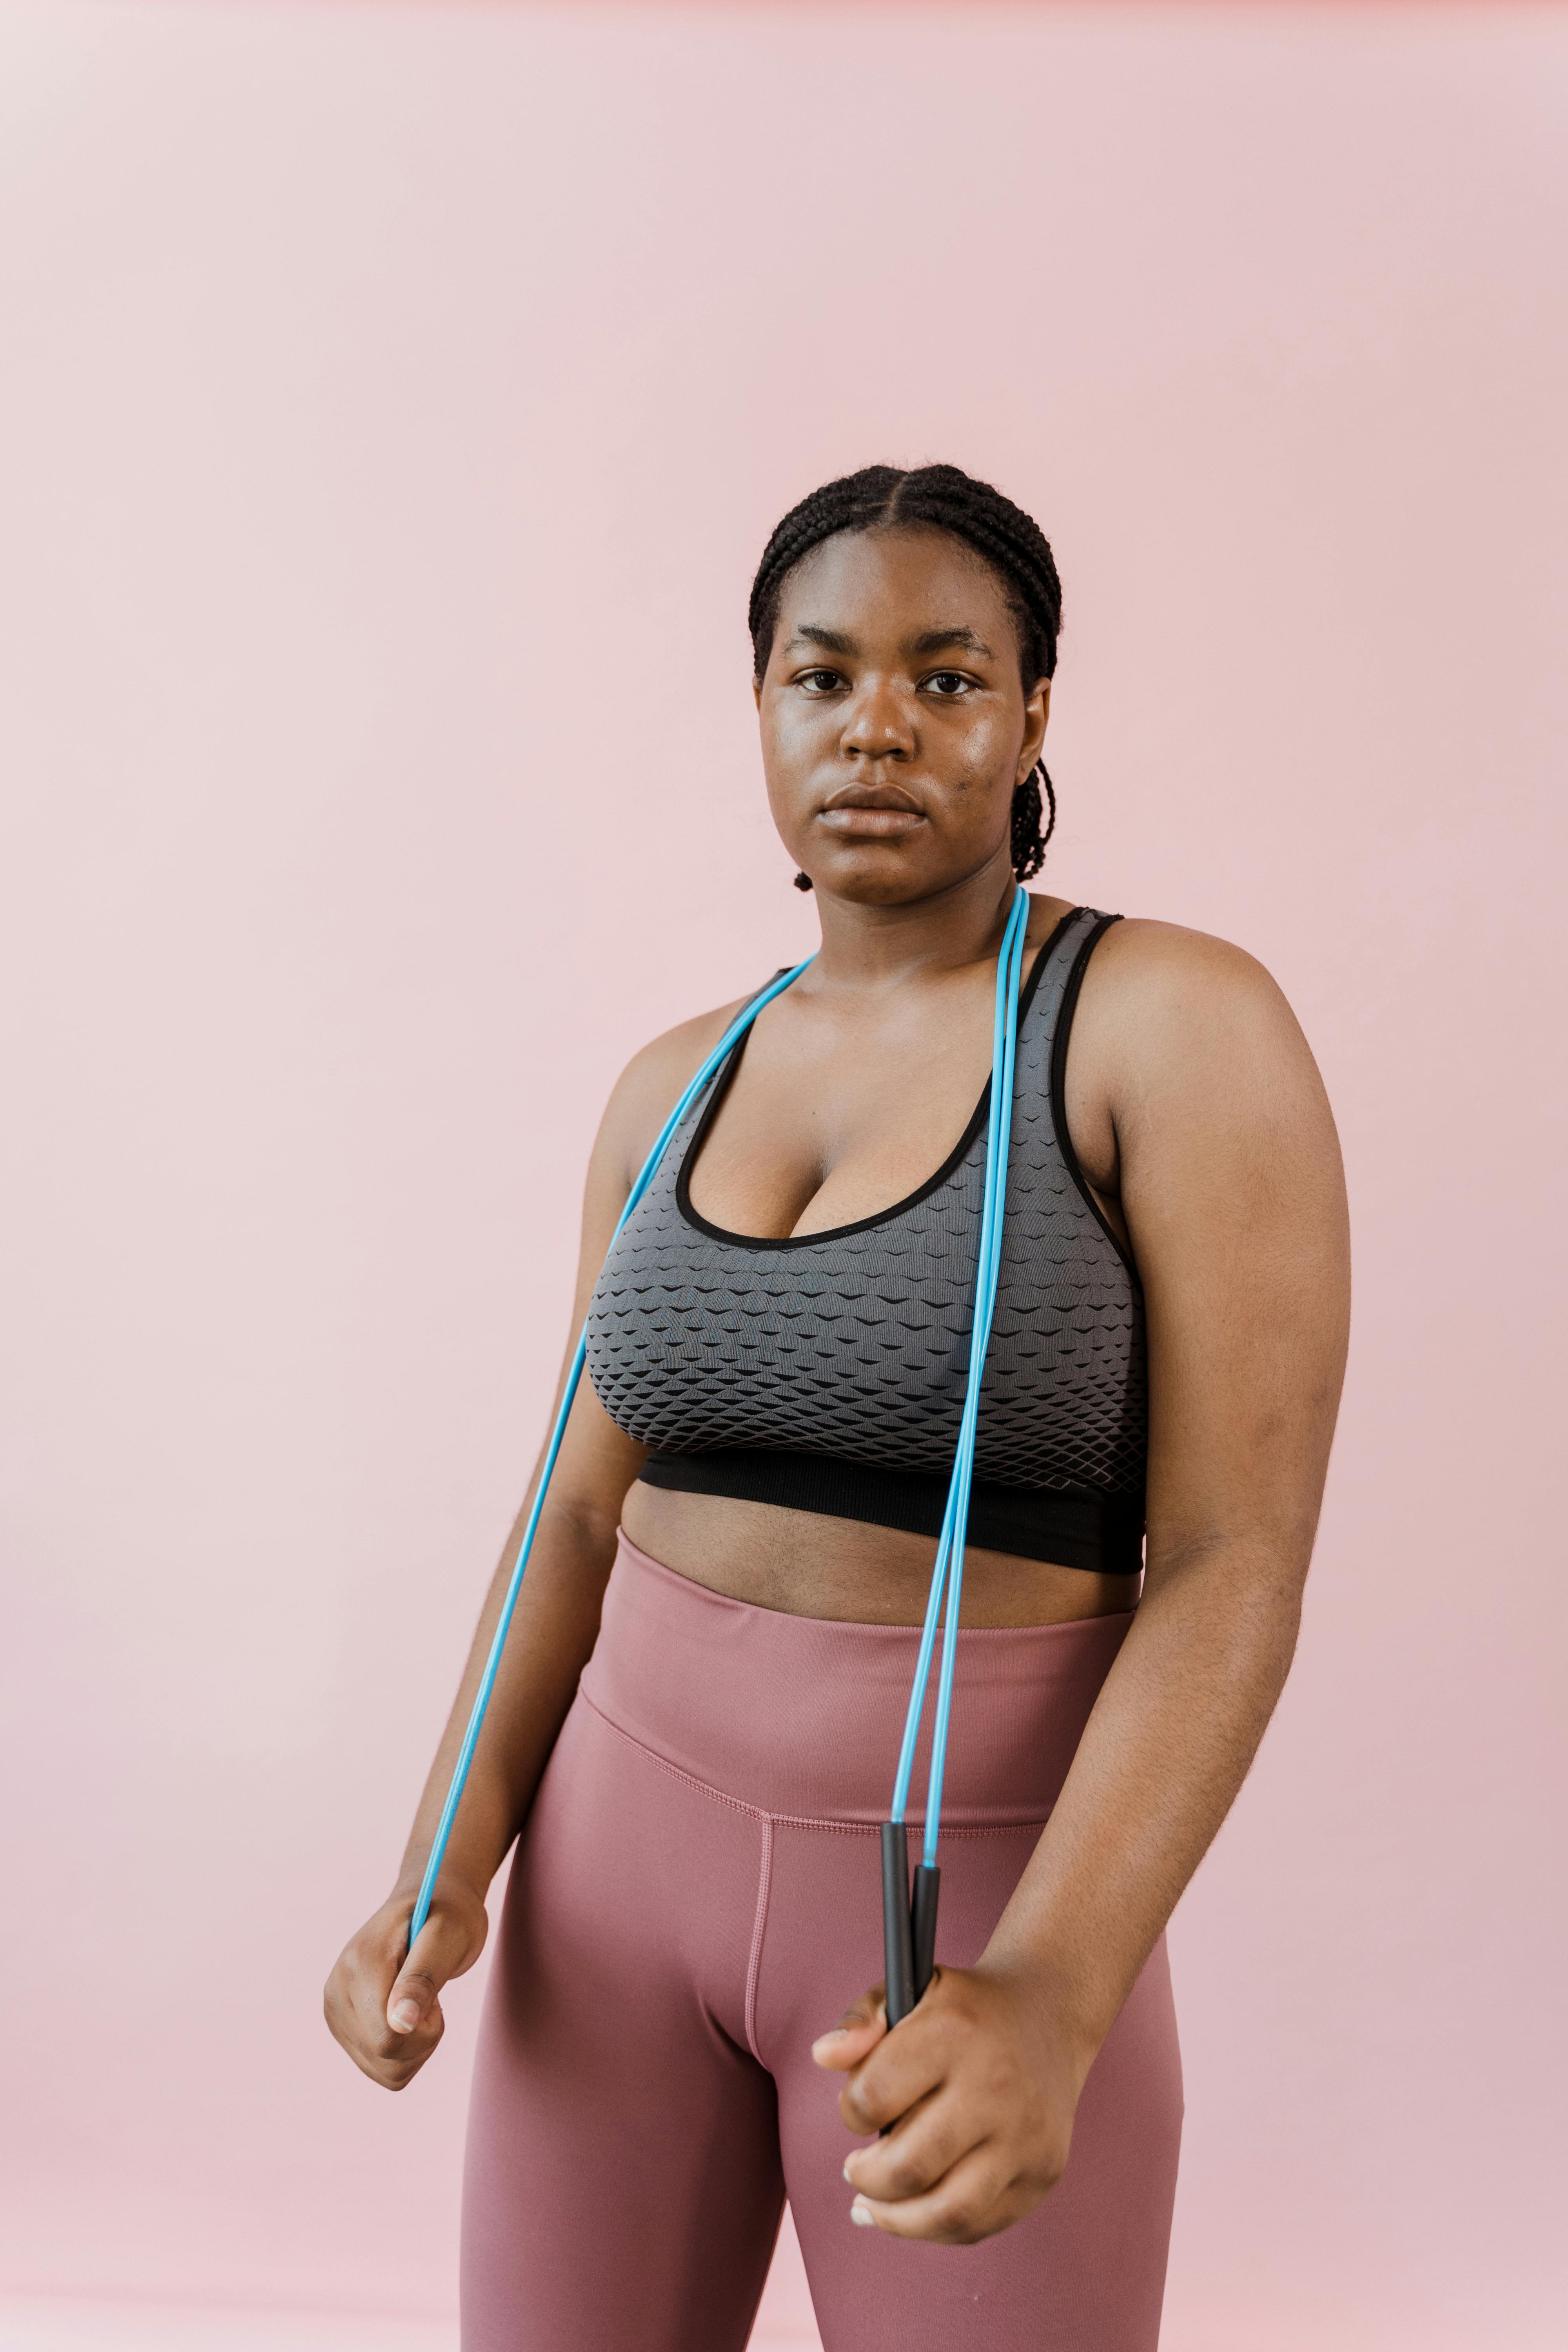 Woman in Gray Sports Bra and Pink Leggings Posing With A Skipping